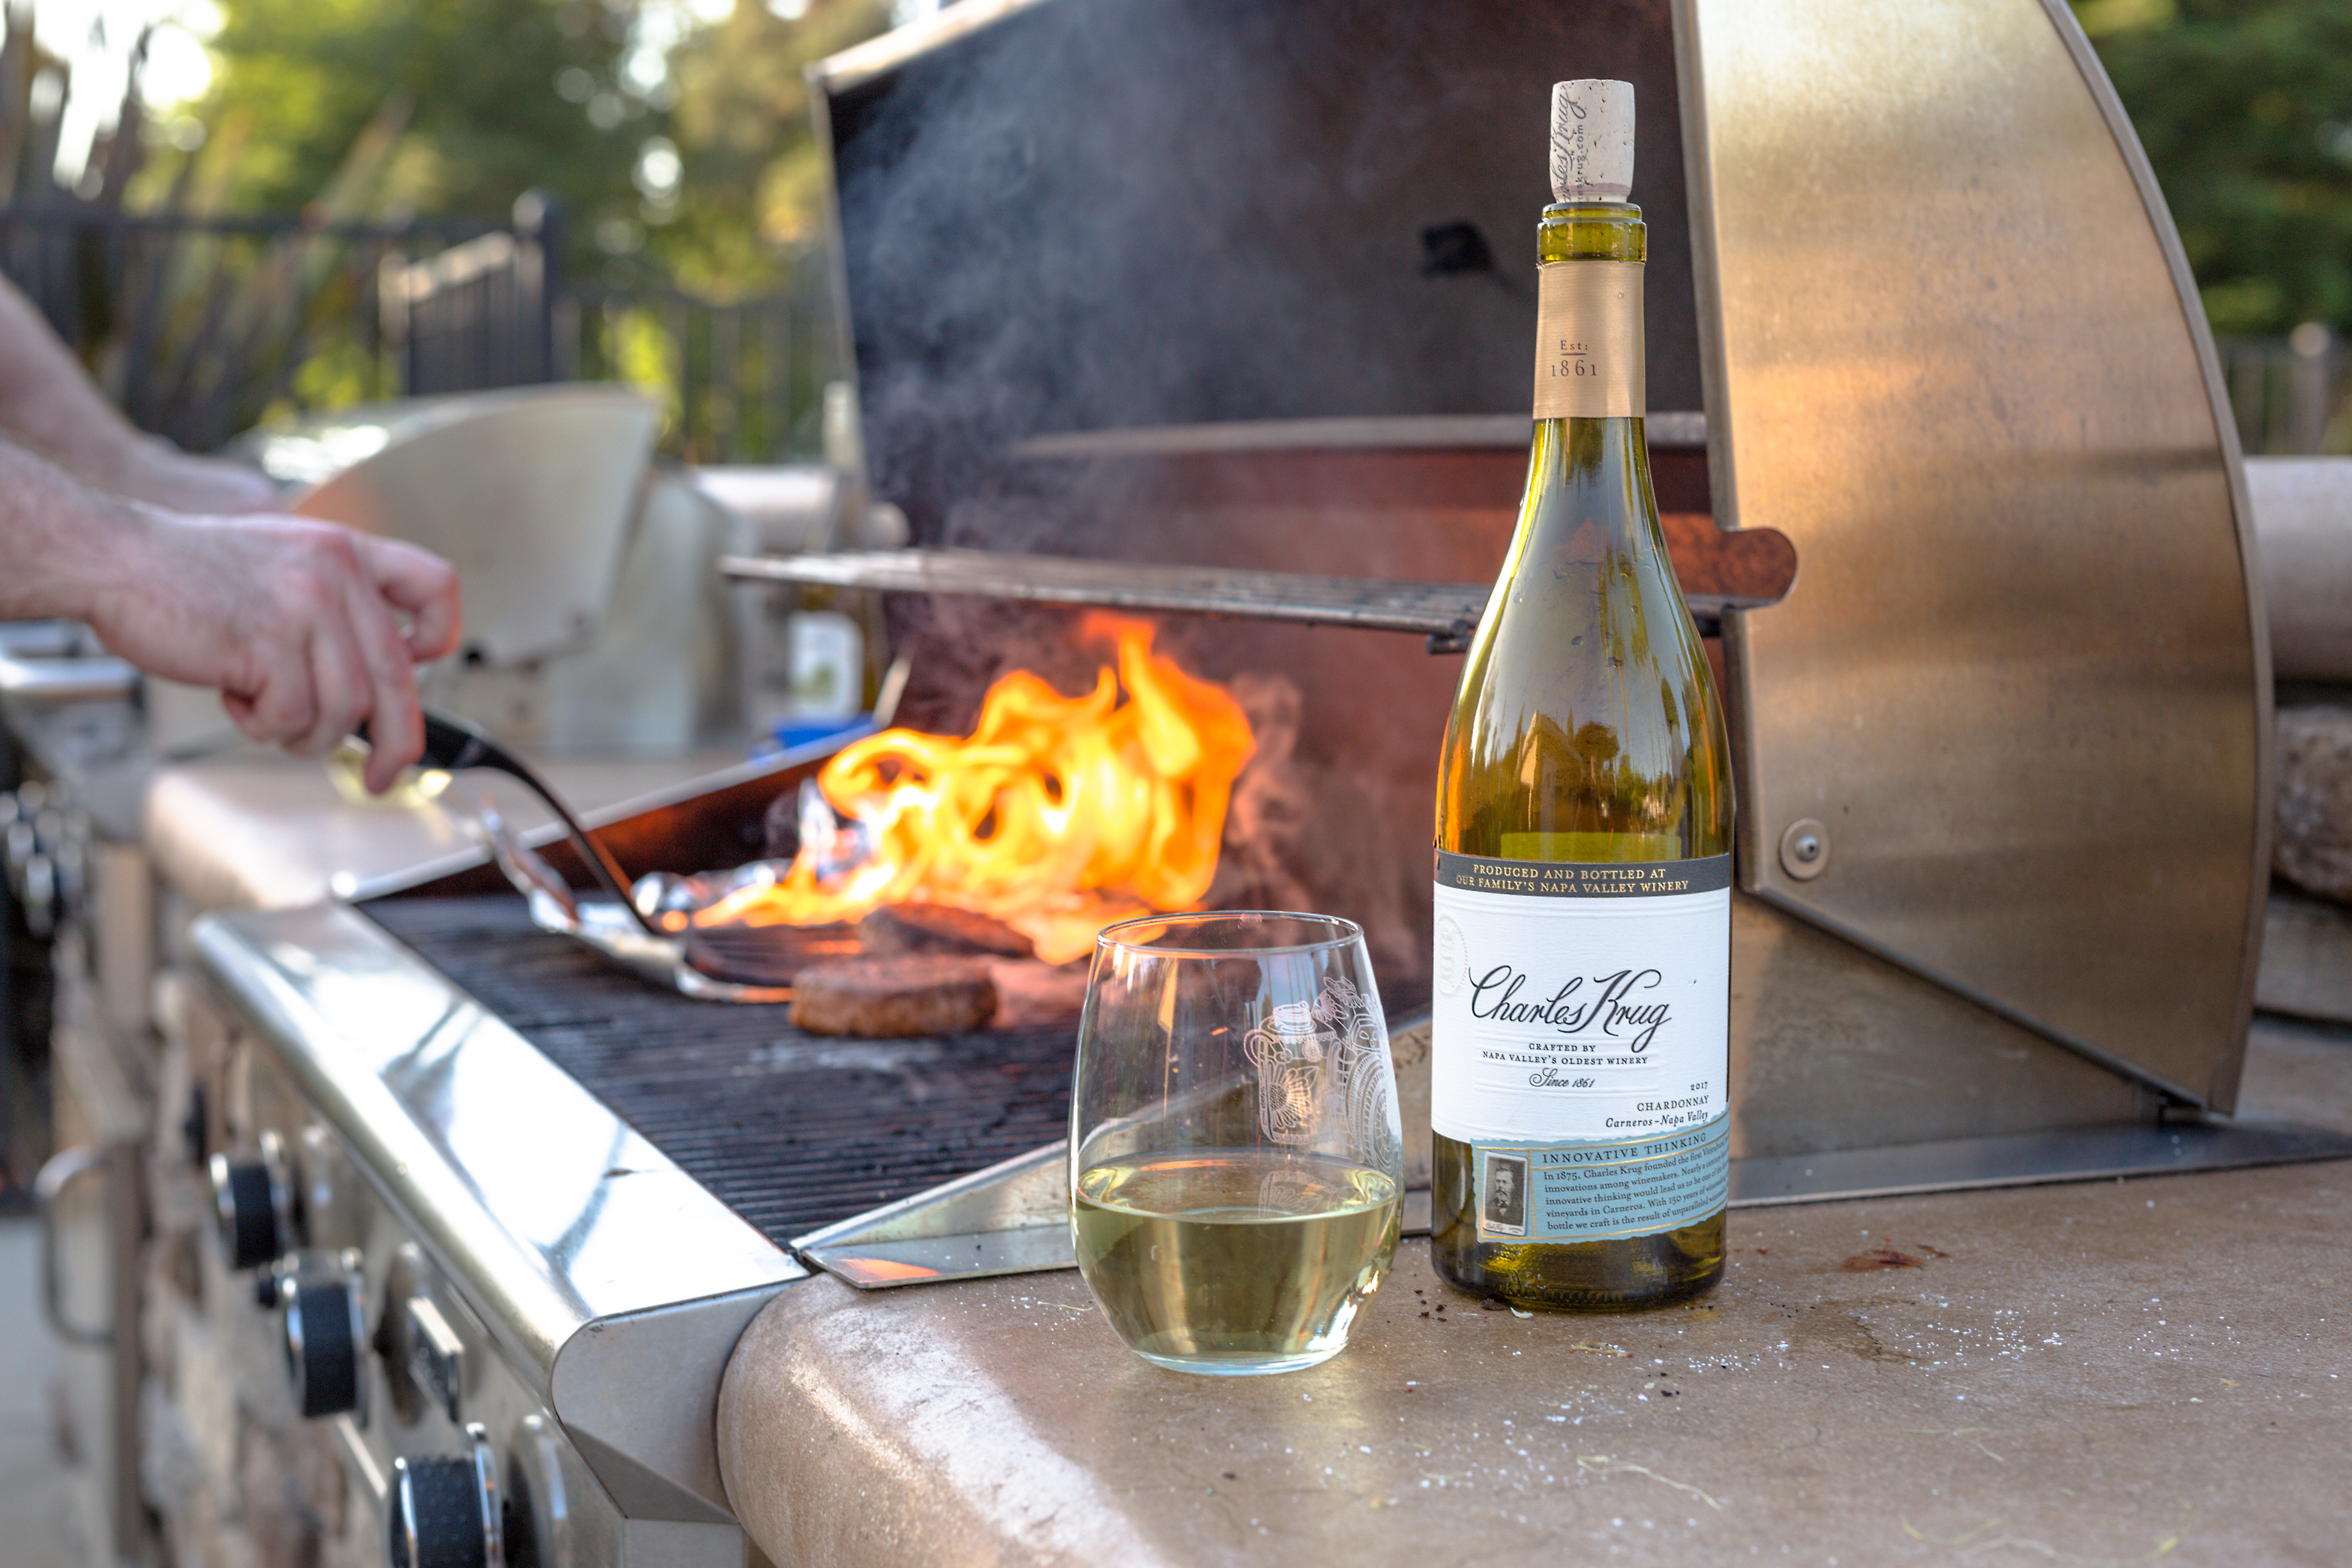 Grilling With The 2017 Chardonnay